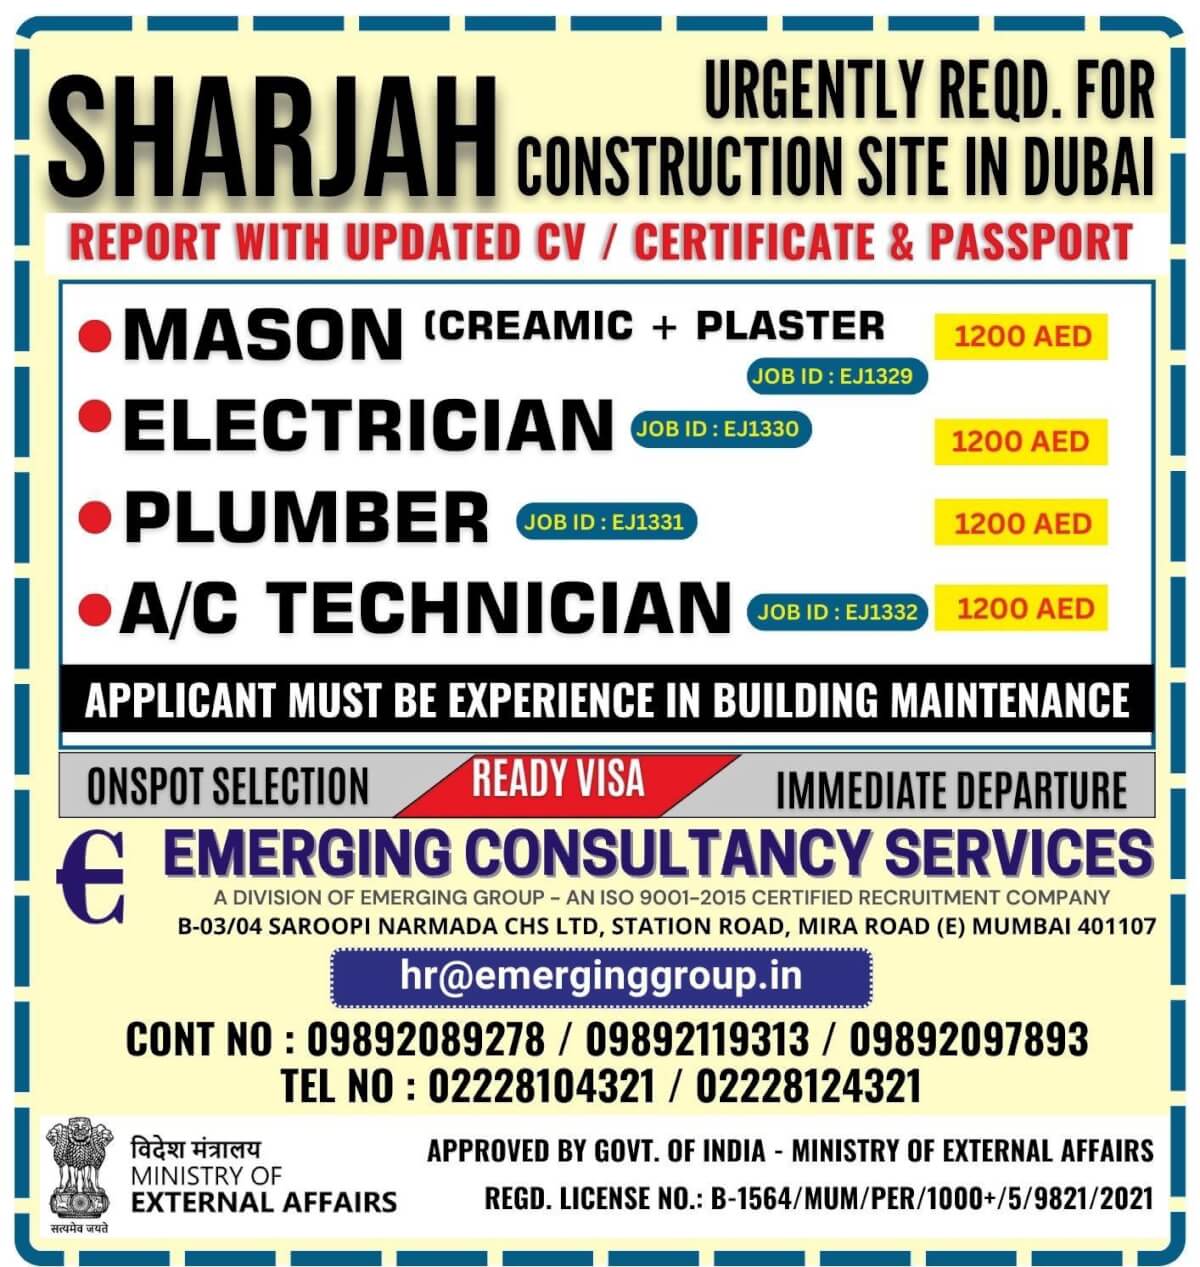 URGENTLY REQUIRED FOR CONSTRUCTION SITE IN SHARJAH -DUBAI